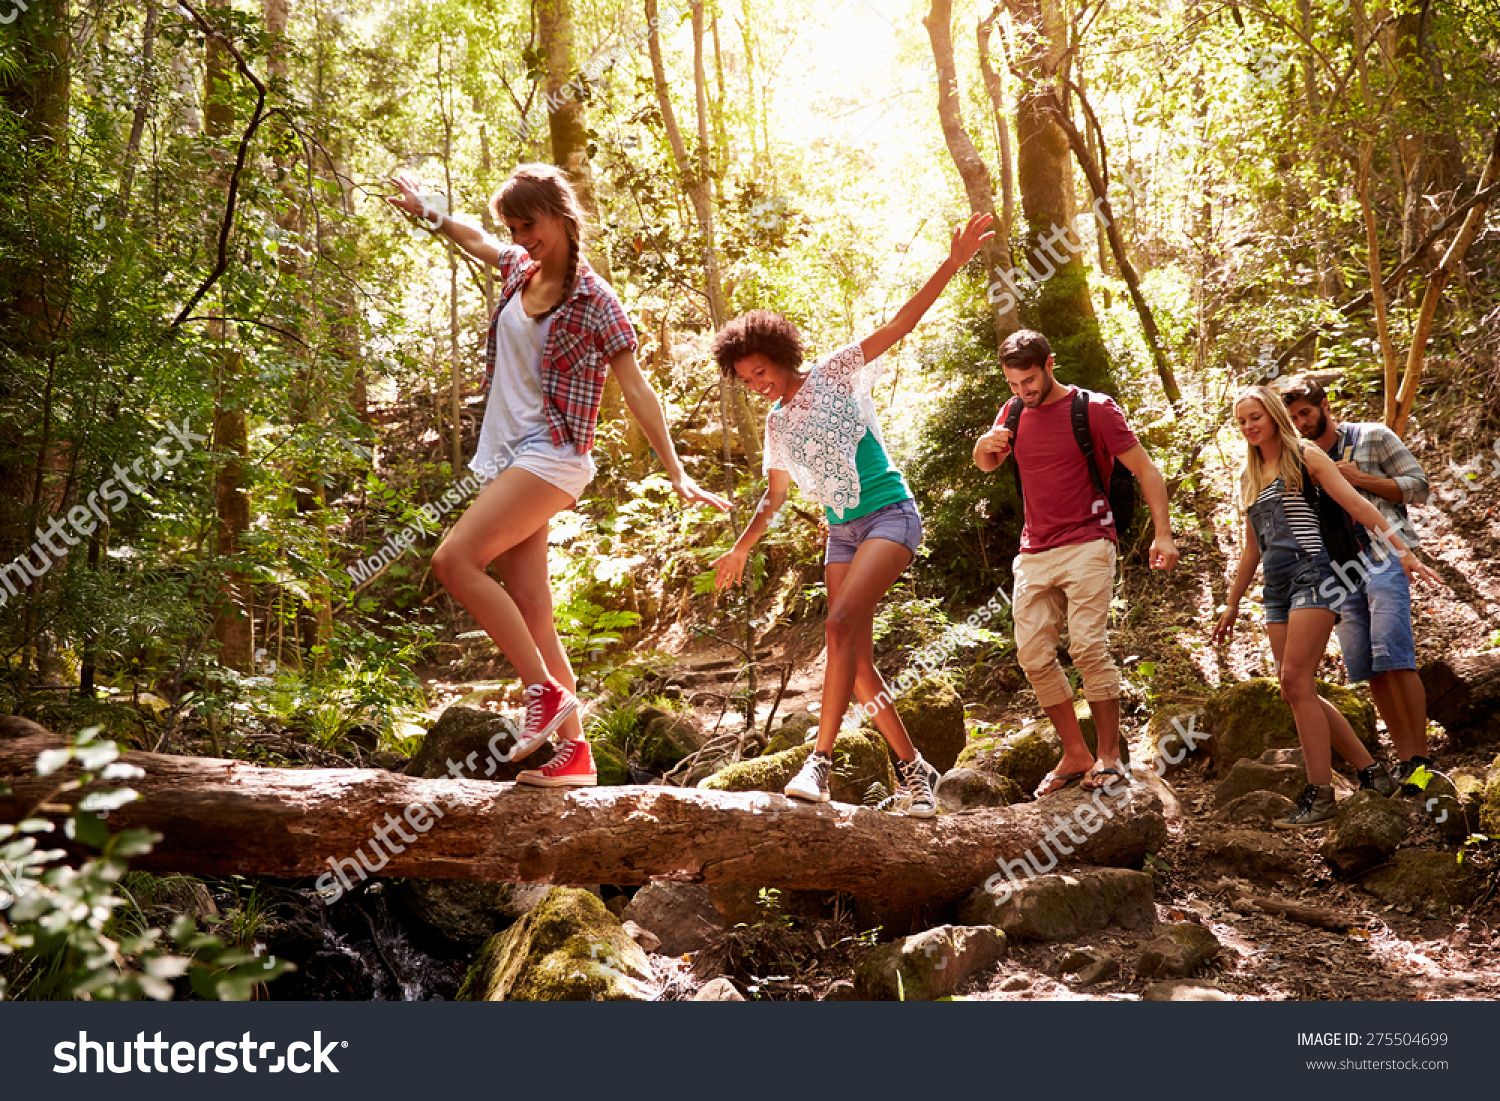 Group Of Friends On Walk Balancing On Tree Trunk In Forest #275504699